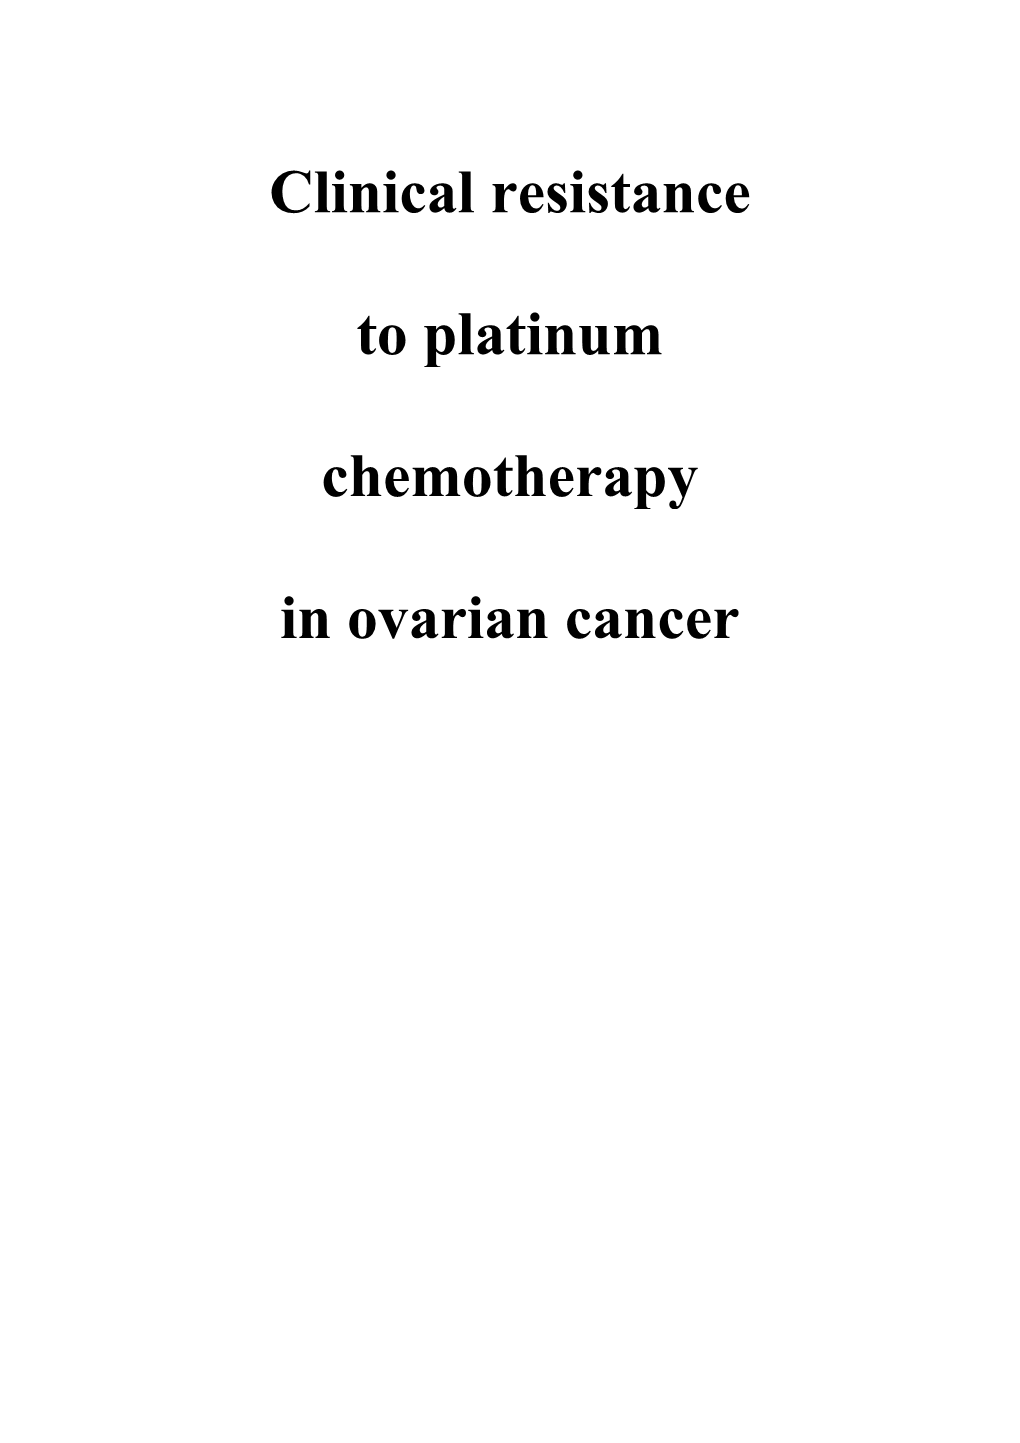 Clinical Resistance to Platinum Chemotherapy in Ovarian Cancer